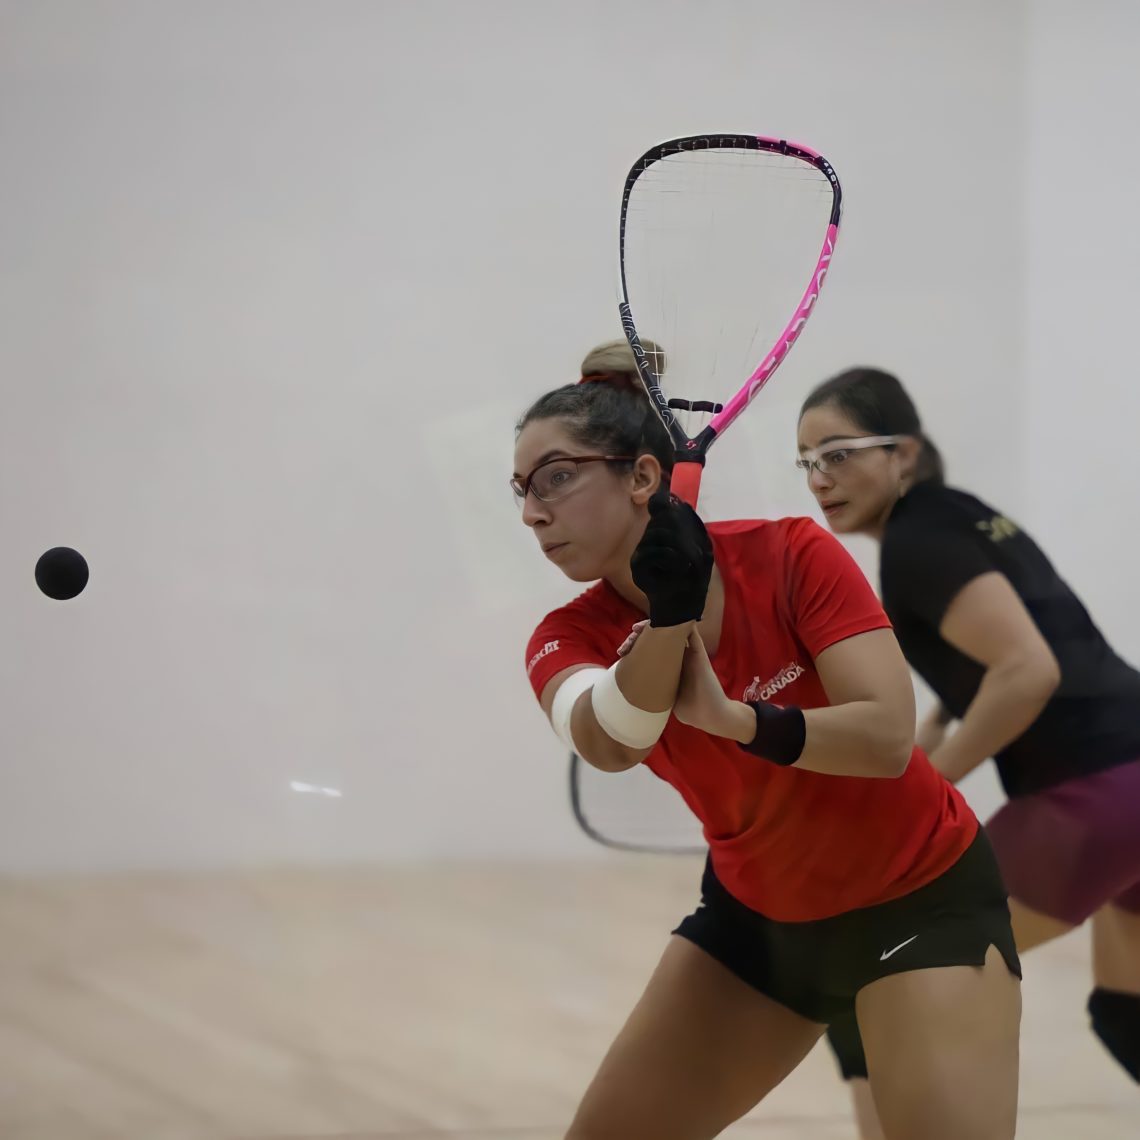 Michèle Morissette is hitting a racquetball with a backhand swing. Her opponent is in the background.